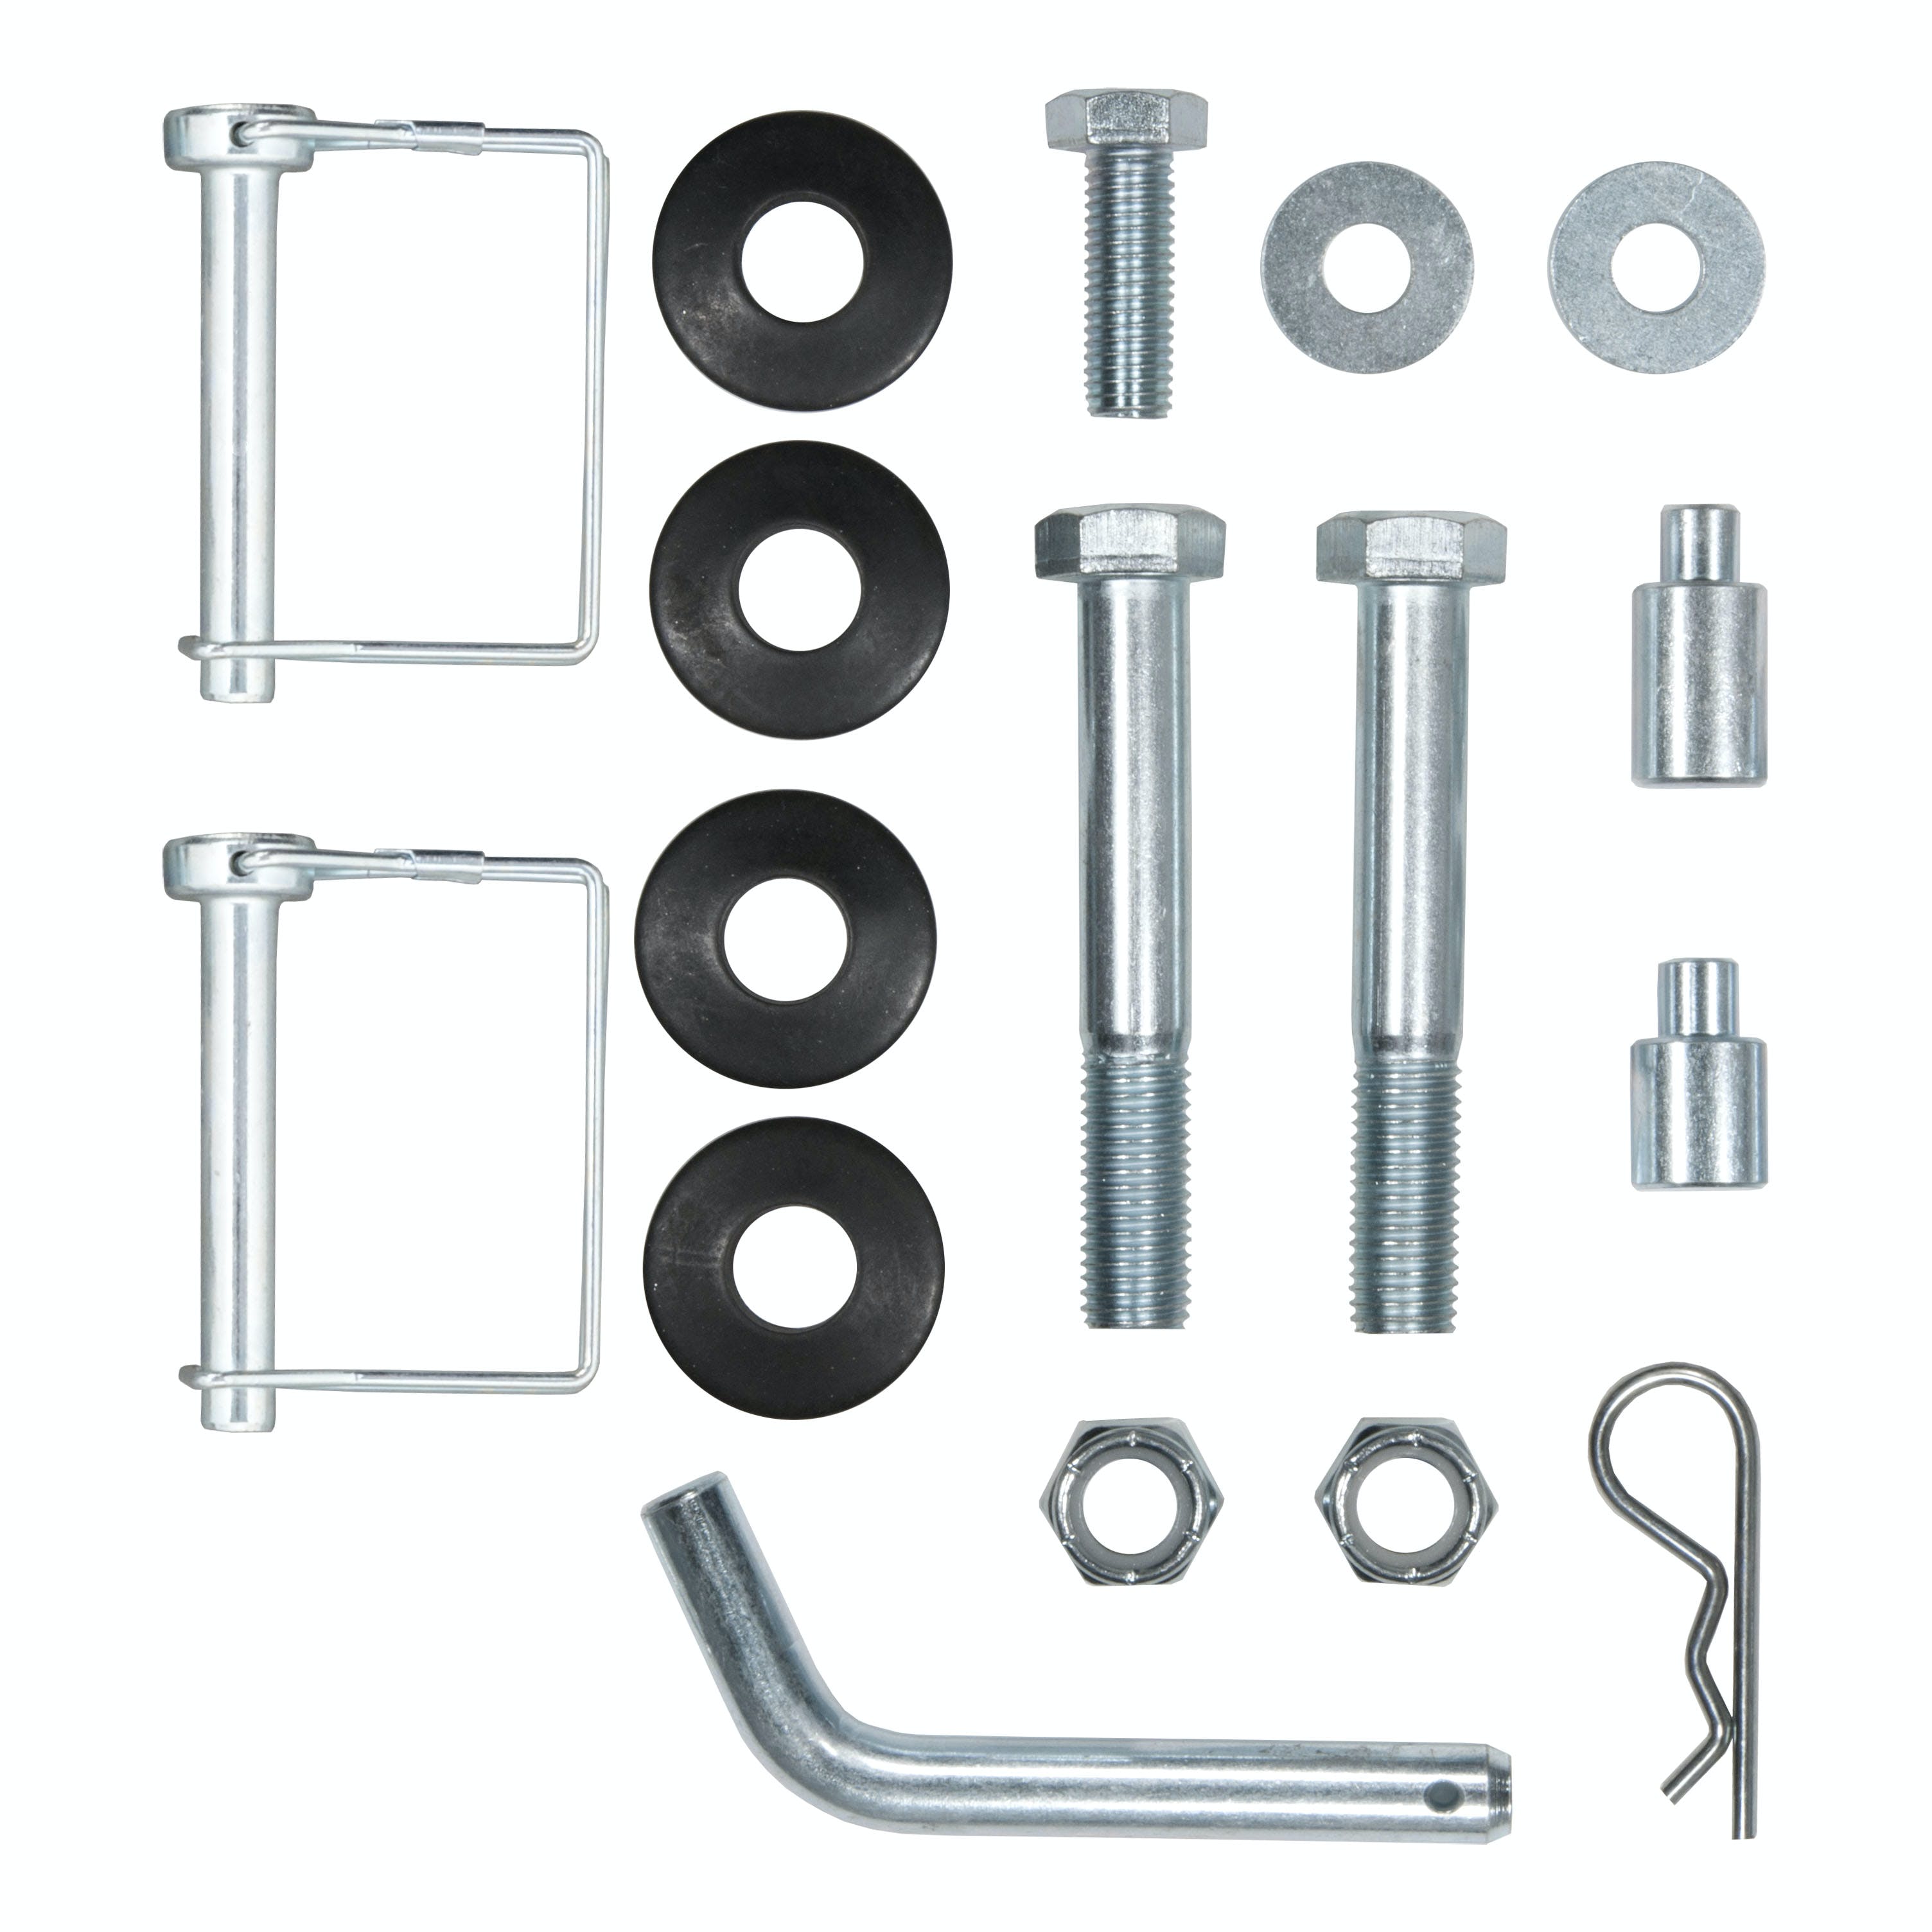 CURT 17554 TruTrack Weight Distribution Hardware Kit for #17501